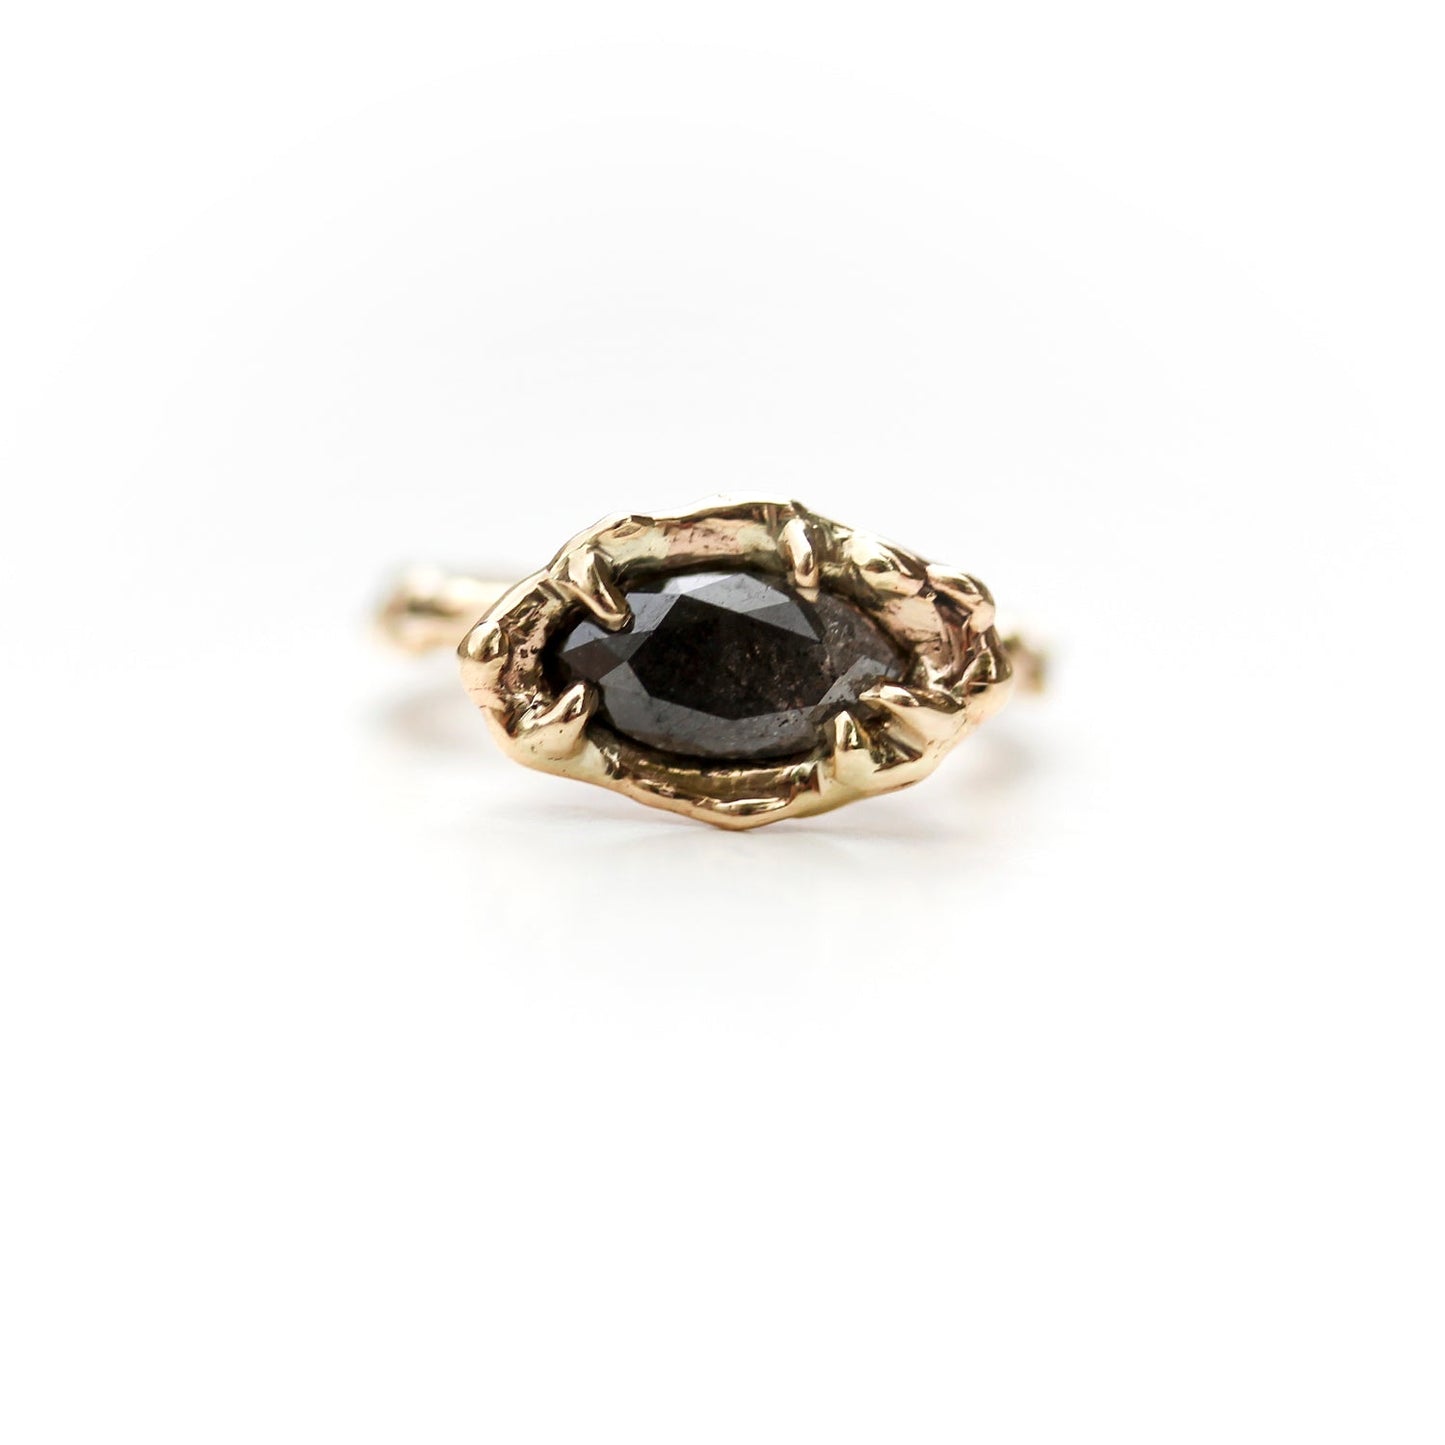 Frontal view of Marissa ring.